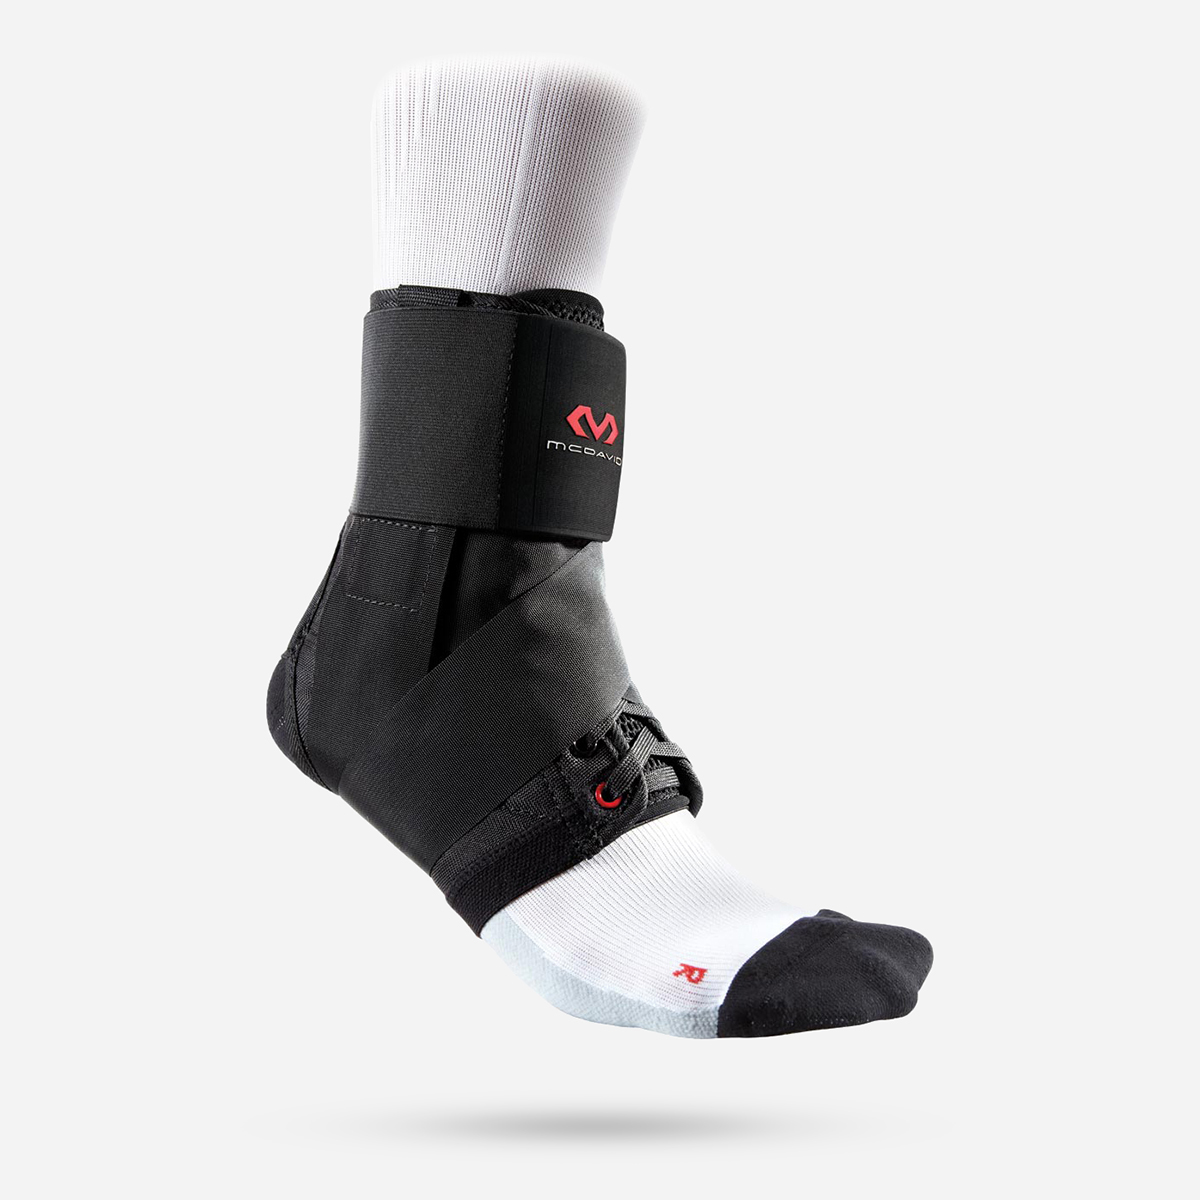 AN150616 Ankle Brace With Straps